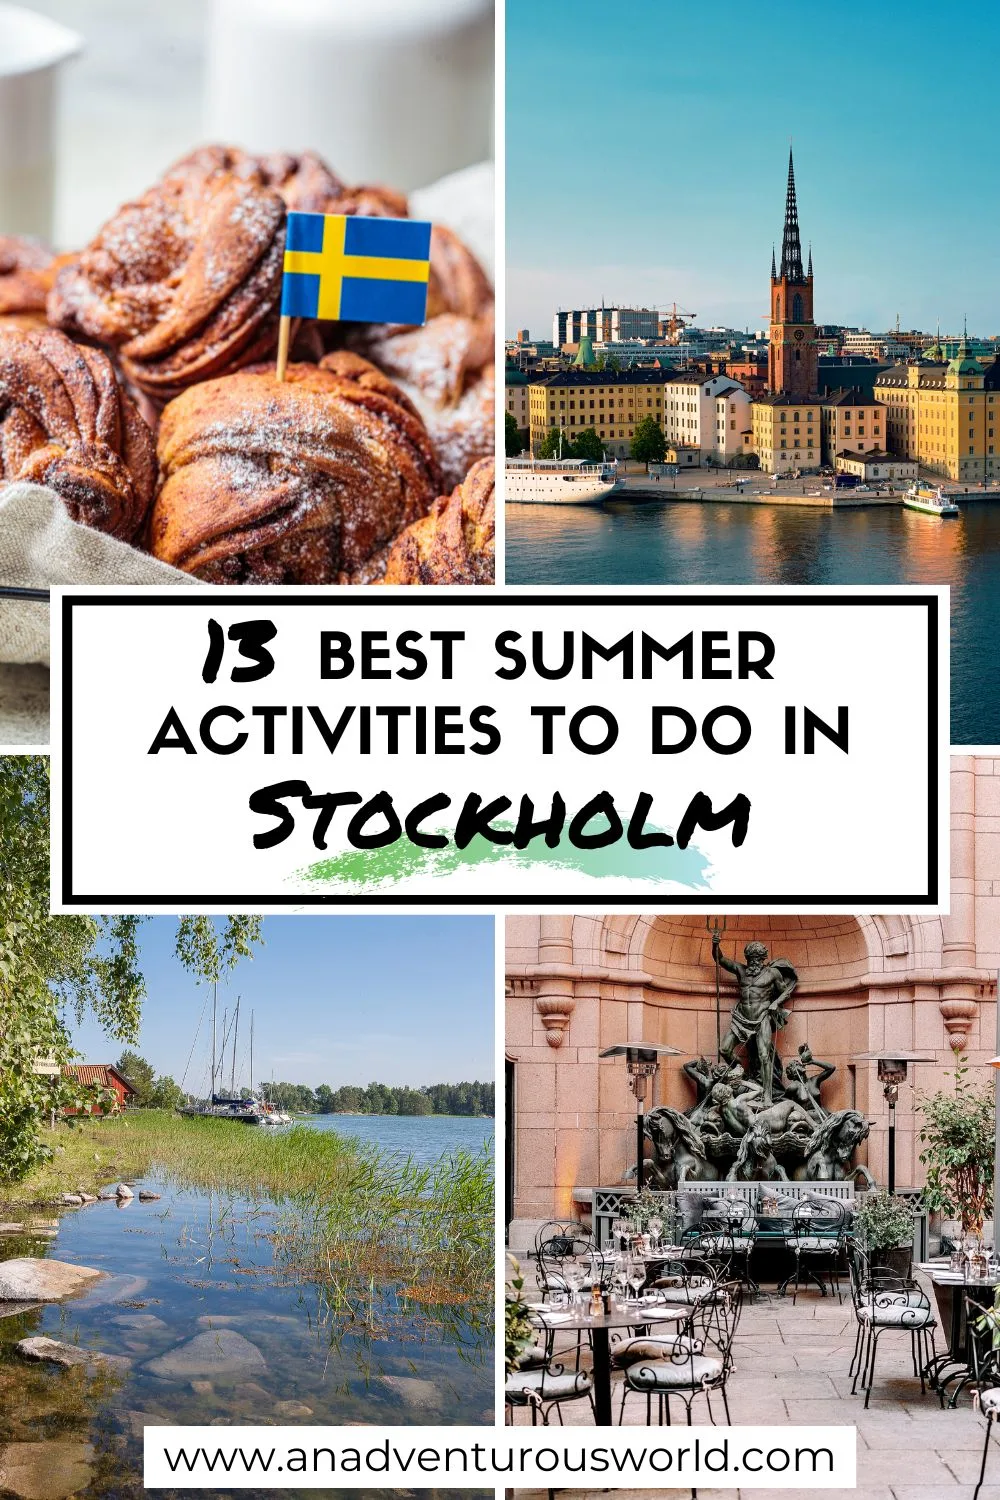 13 BEST Things to do in Stockholm in Summer